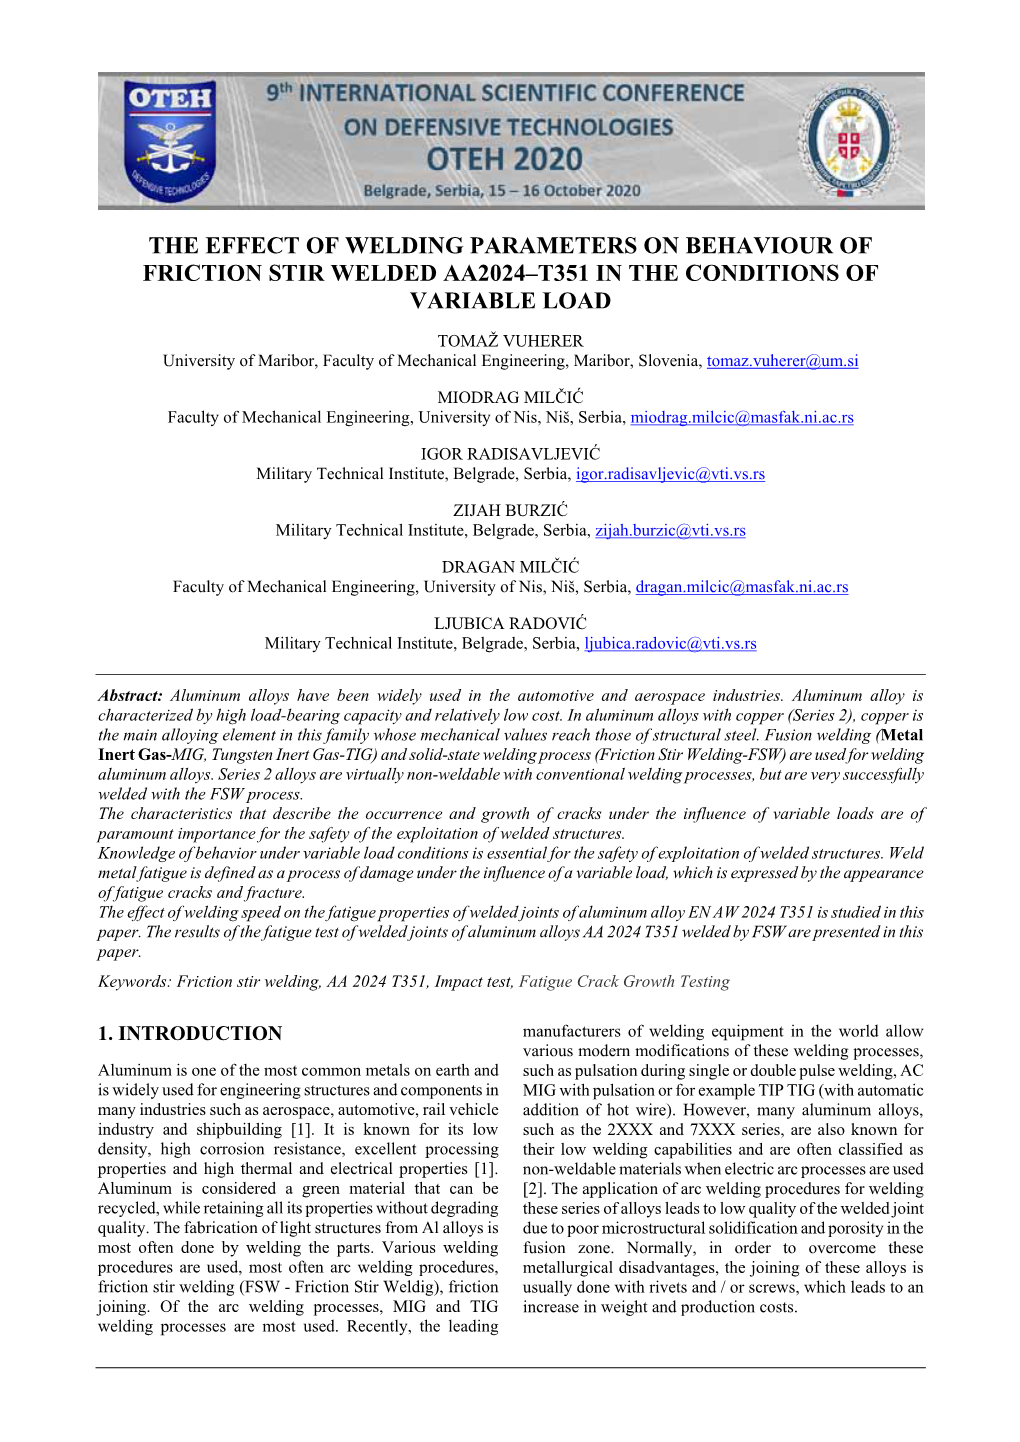 The Effect of Welding Parameters on Behaviour of Friction Stir Welded Aa2024–T351 in the Conditions of Variable Load